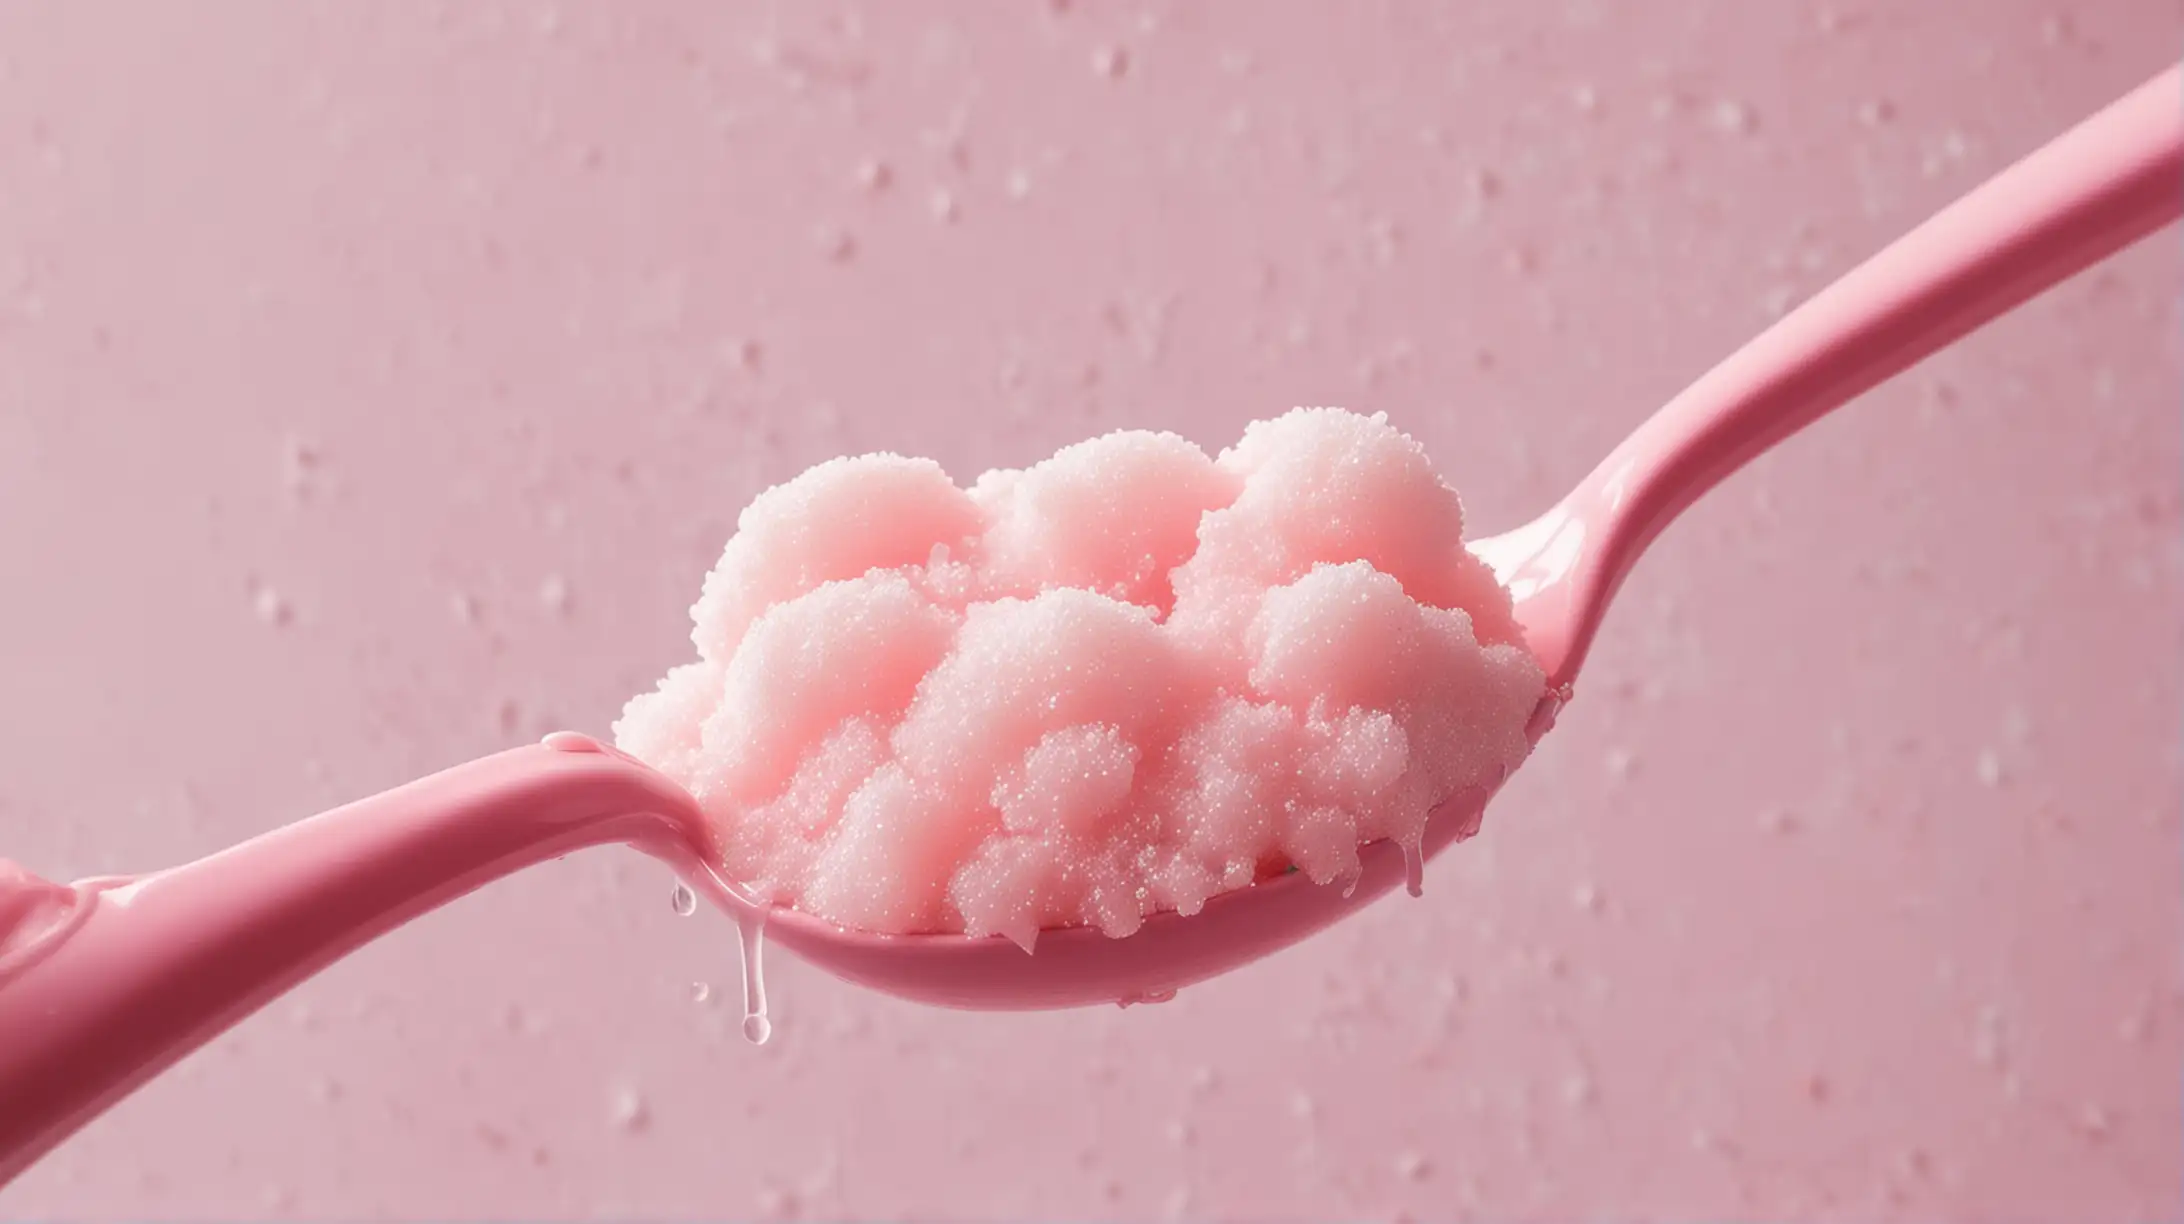 Person Holding Large Pink Spoon Dripping Sugar Culinary Art Concept